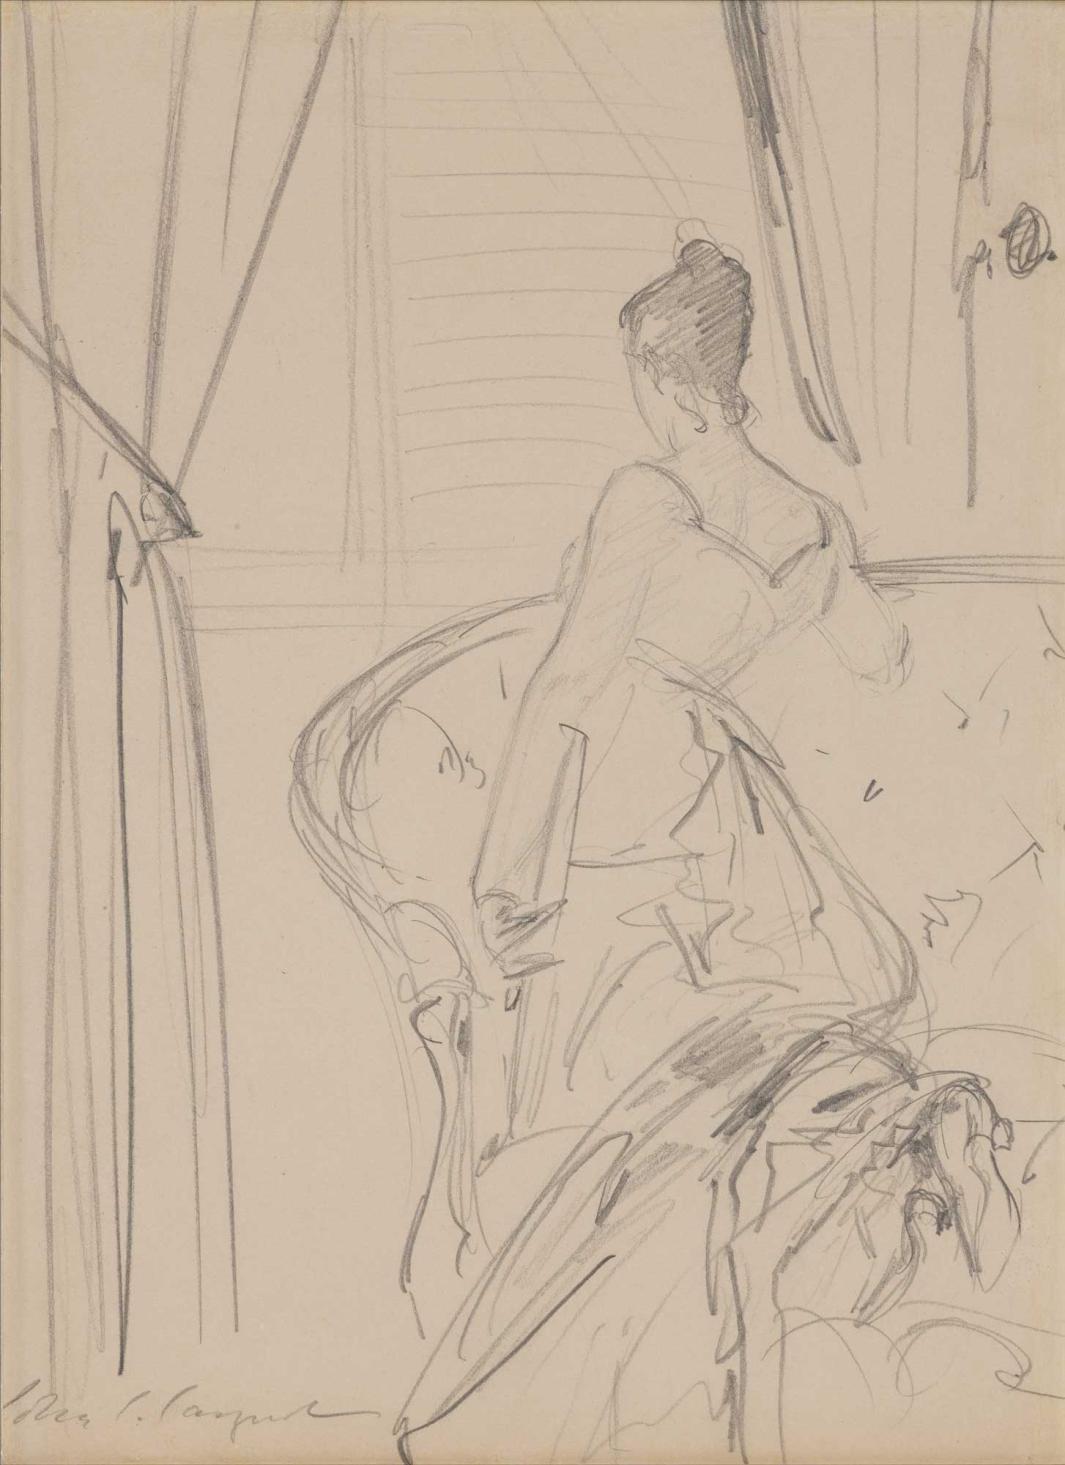 Graphite drawing of a woman kneeling on a couch, her back to the viewer.